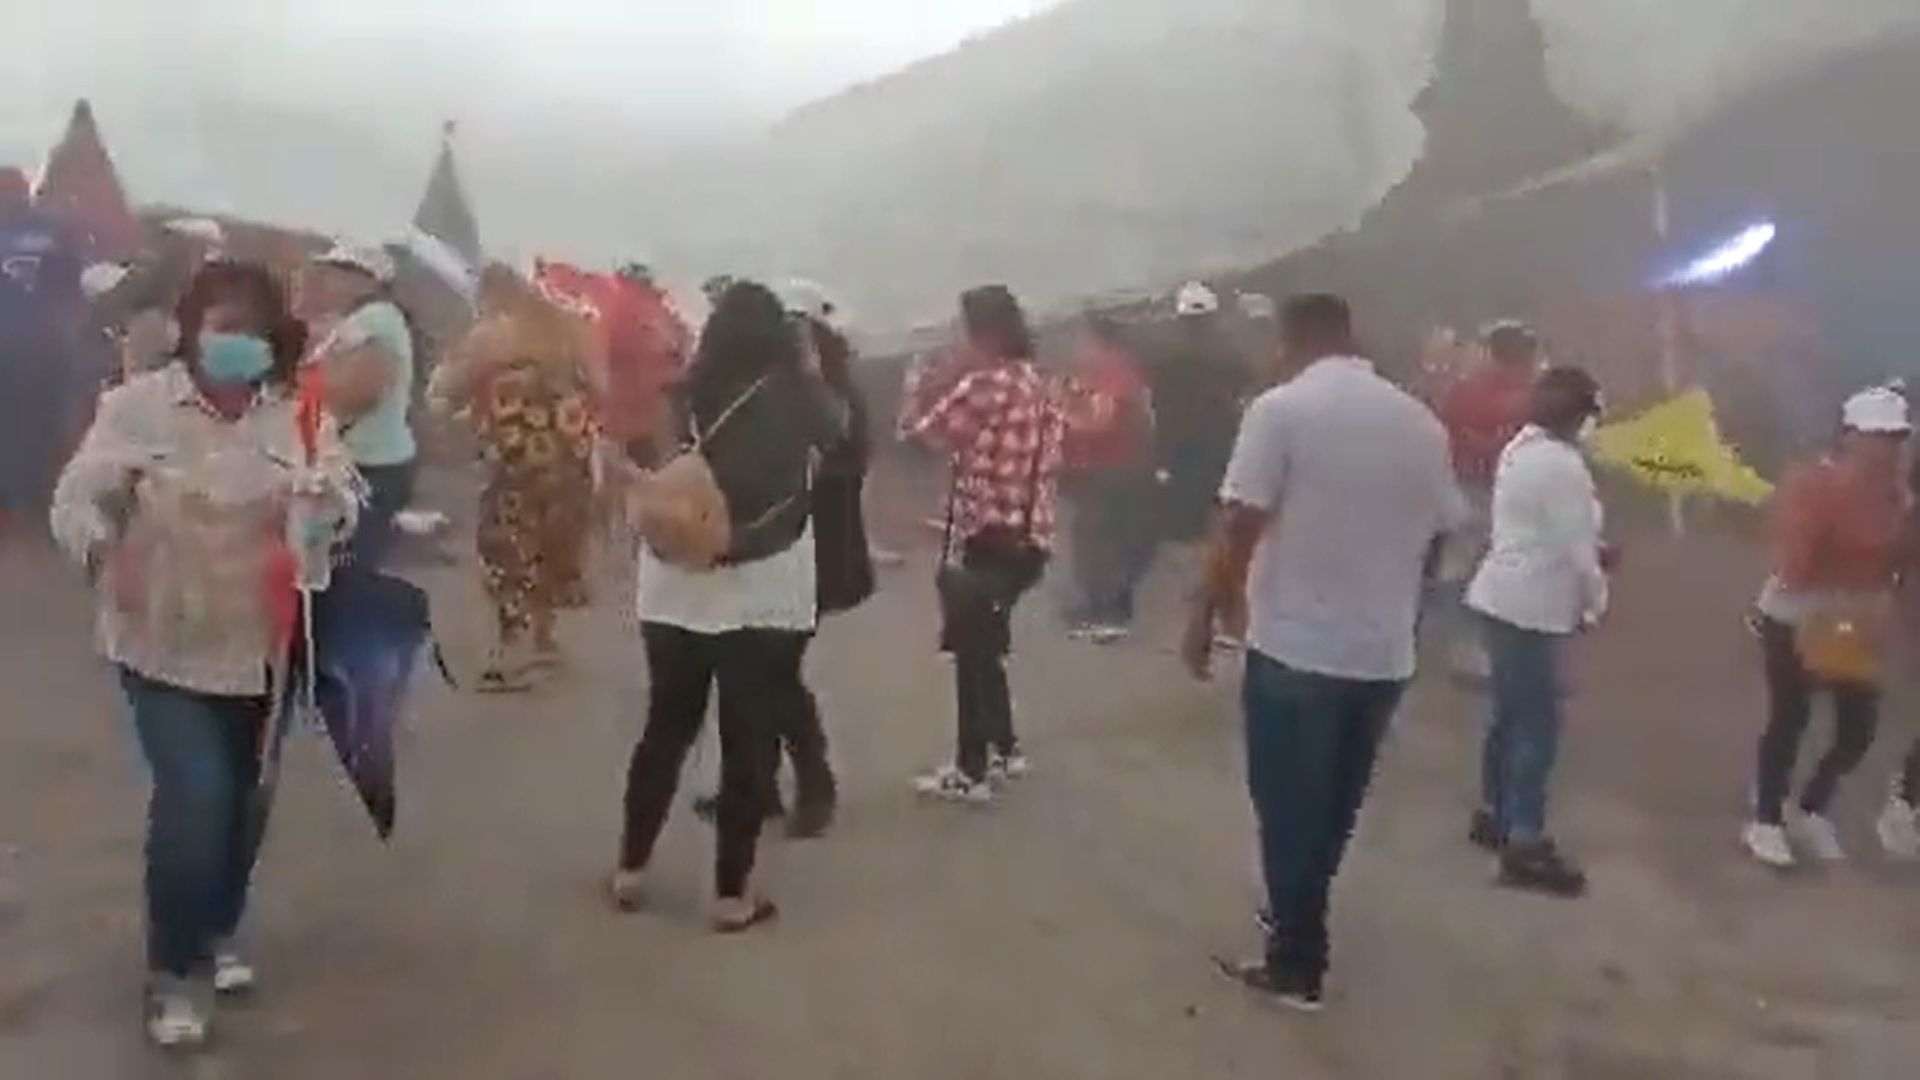 The event to see the candidate for the governorship of the State of Mexico, Alejandra del Moral, was canceled after a tent was blown up (Capture Twitter)